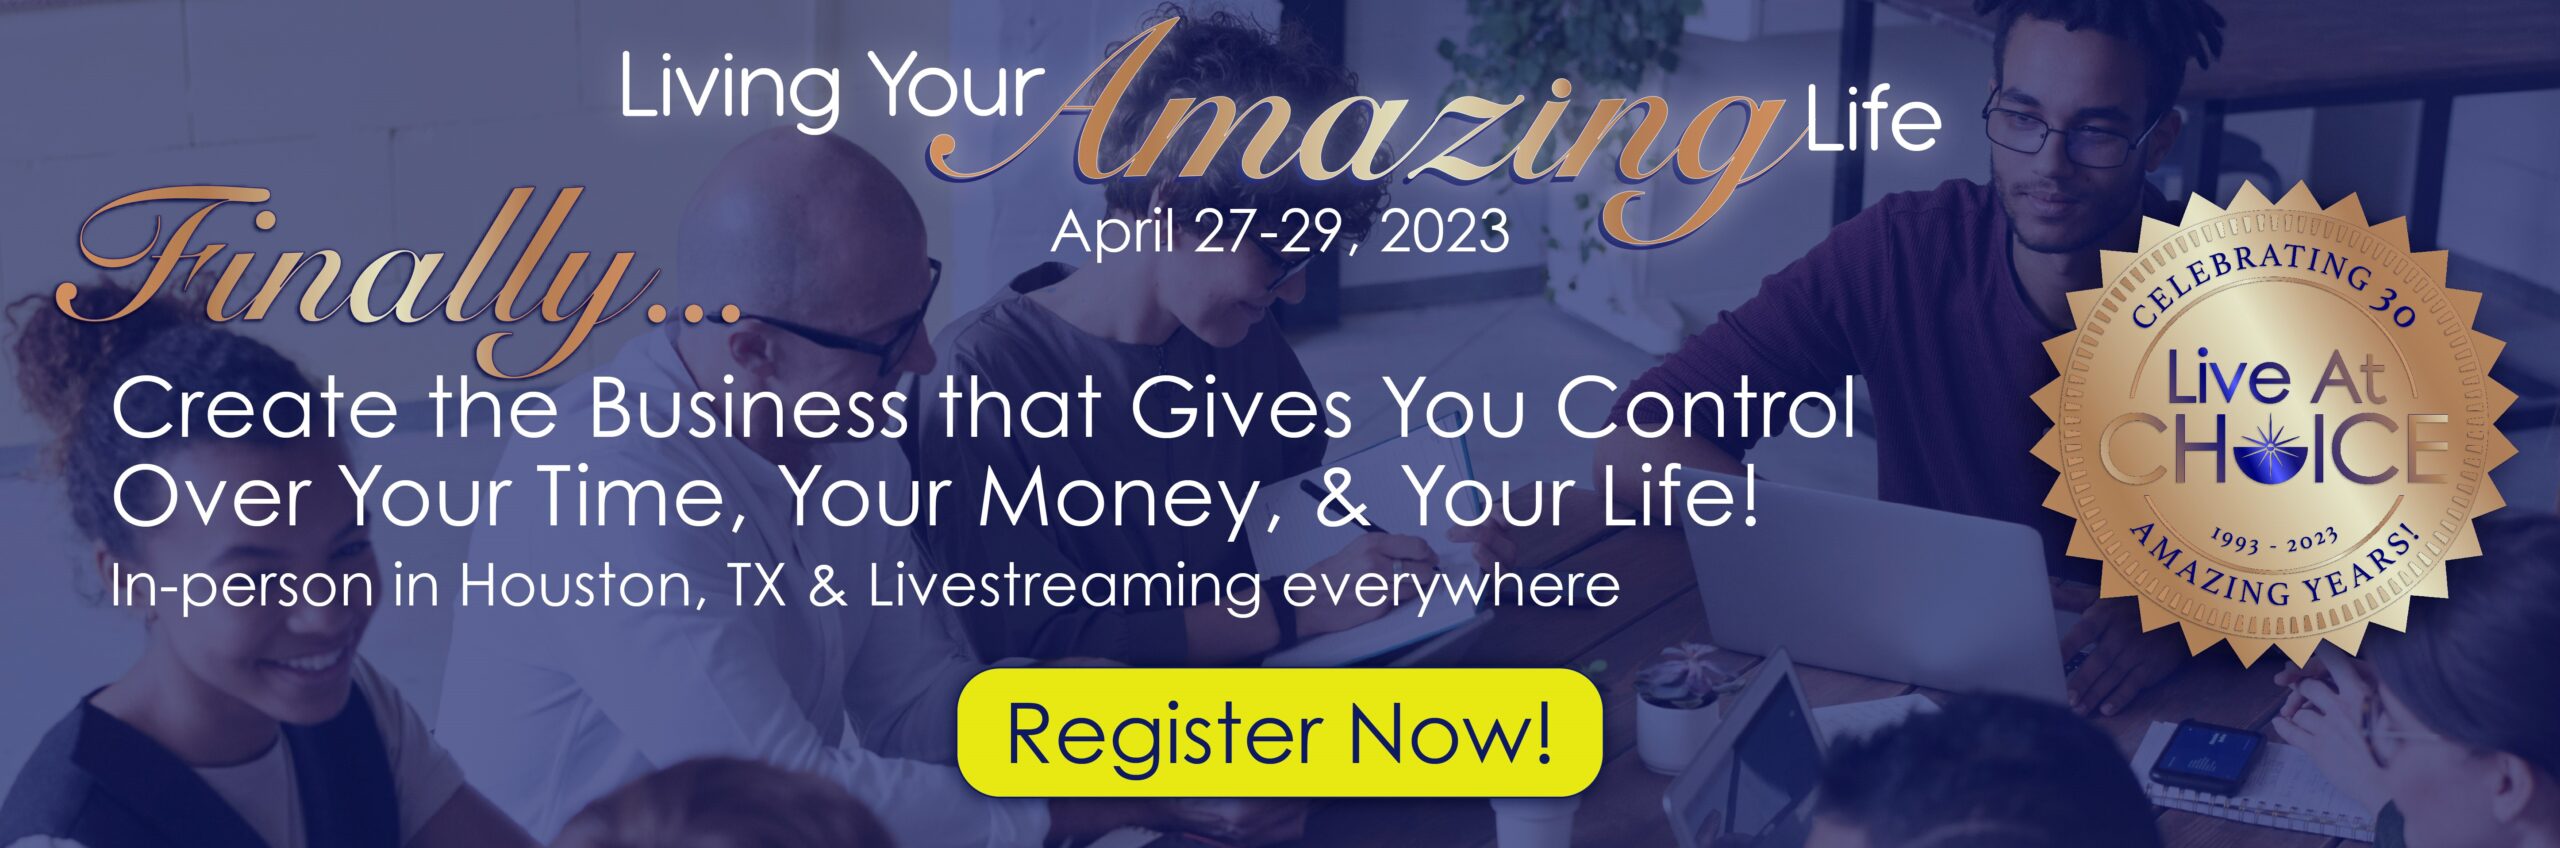 Living Your Amazing Life Banner